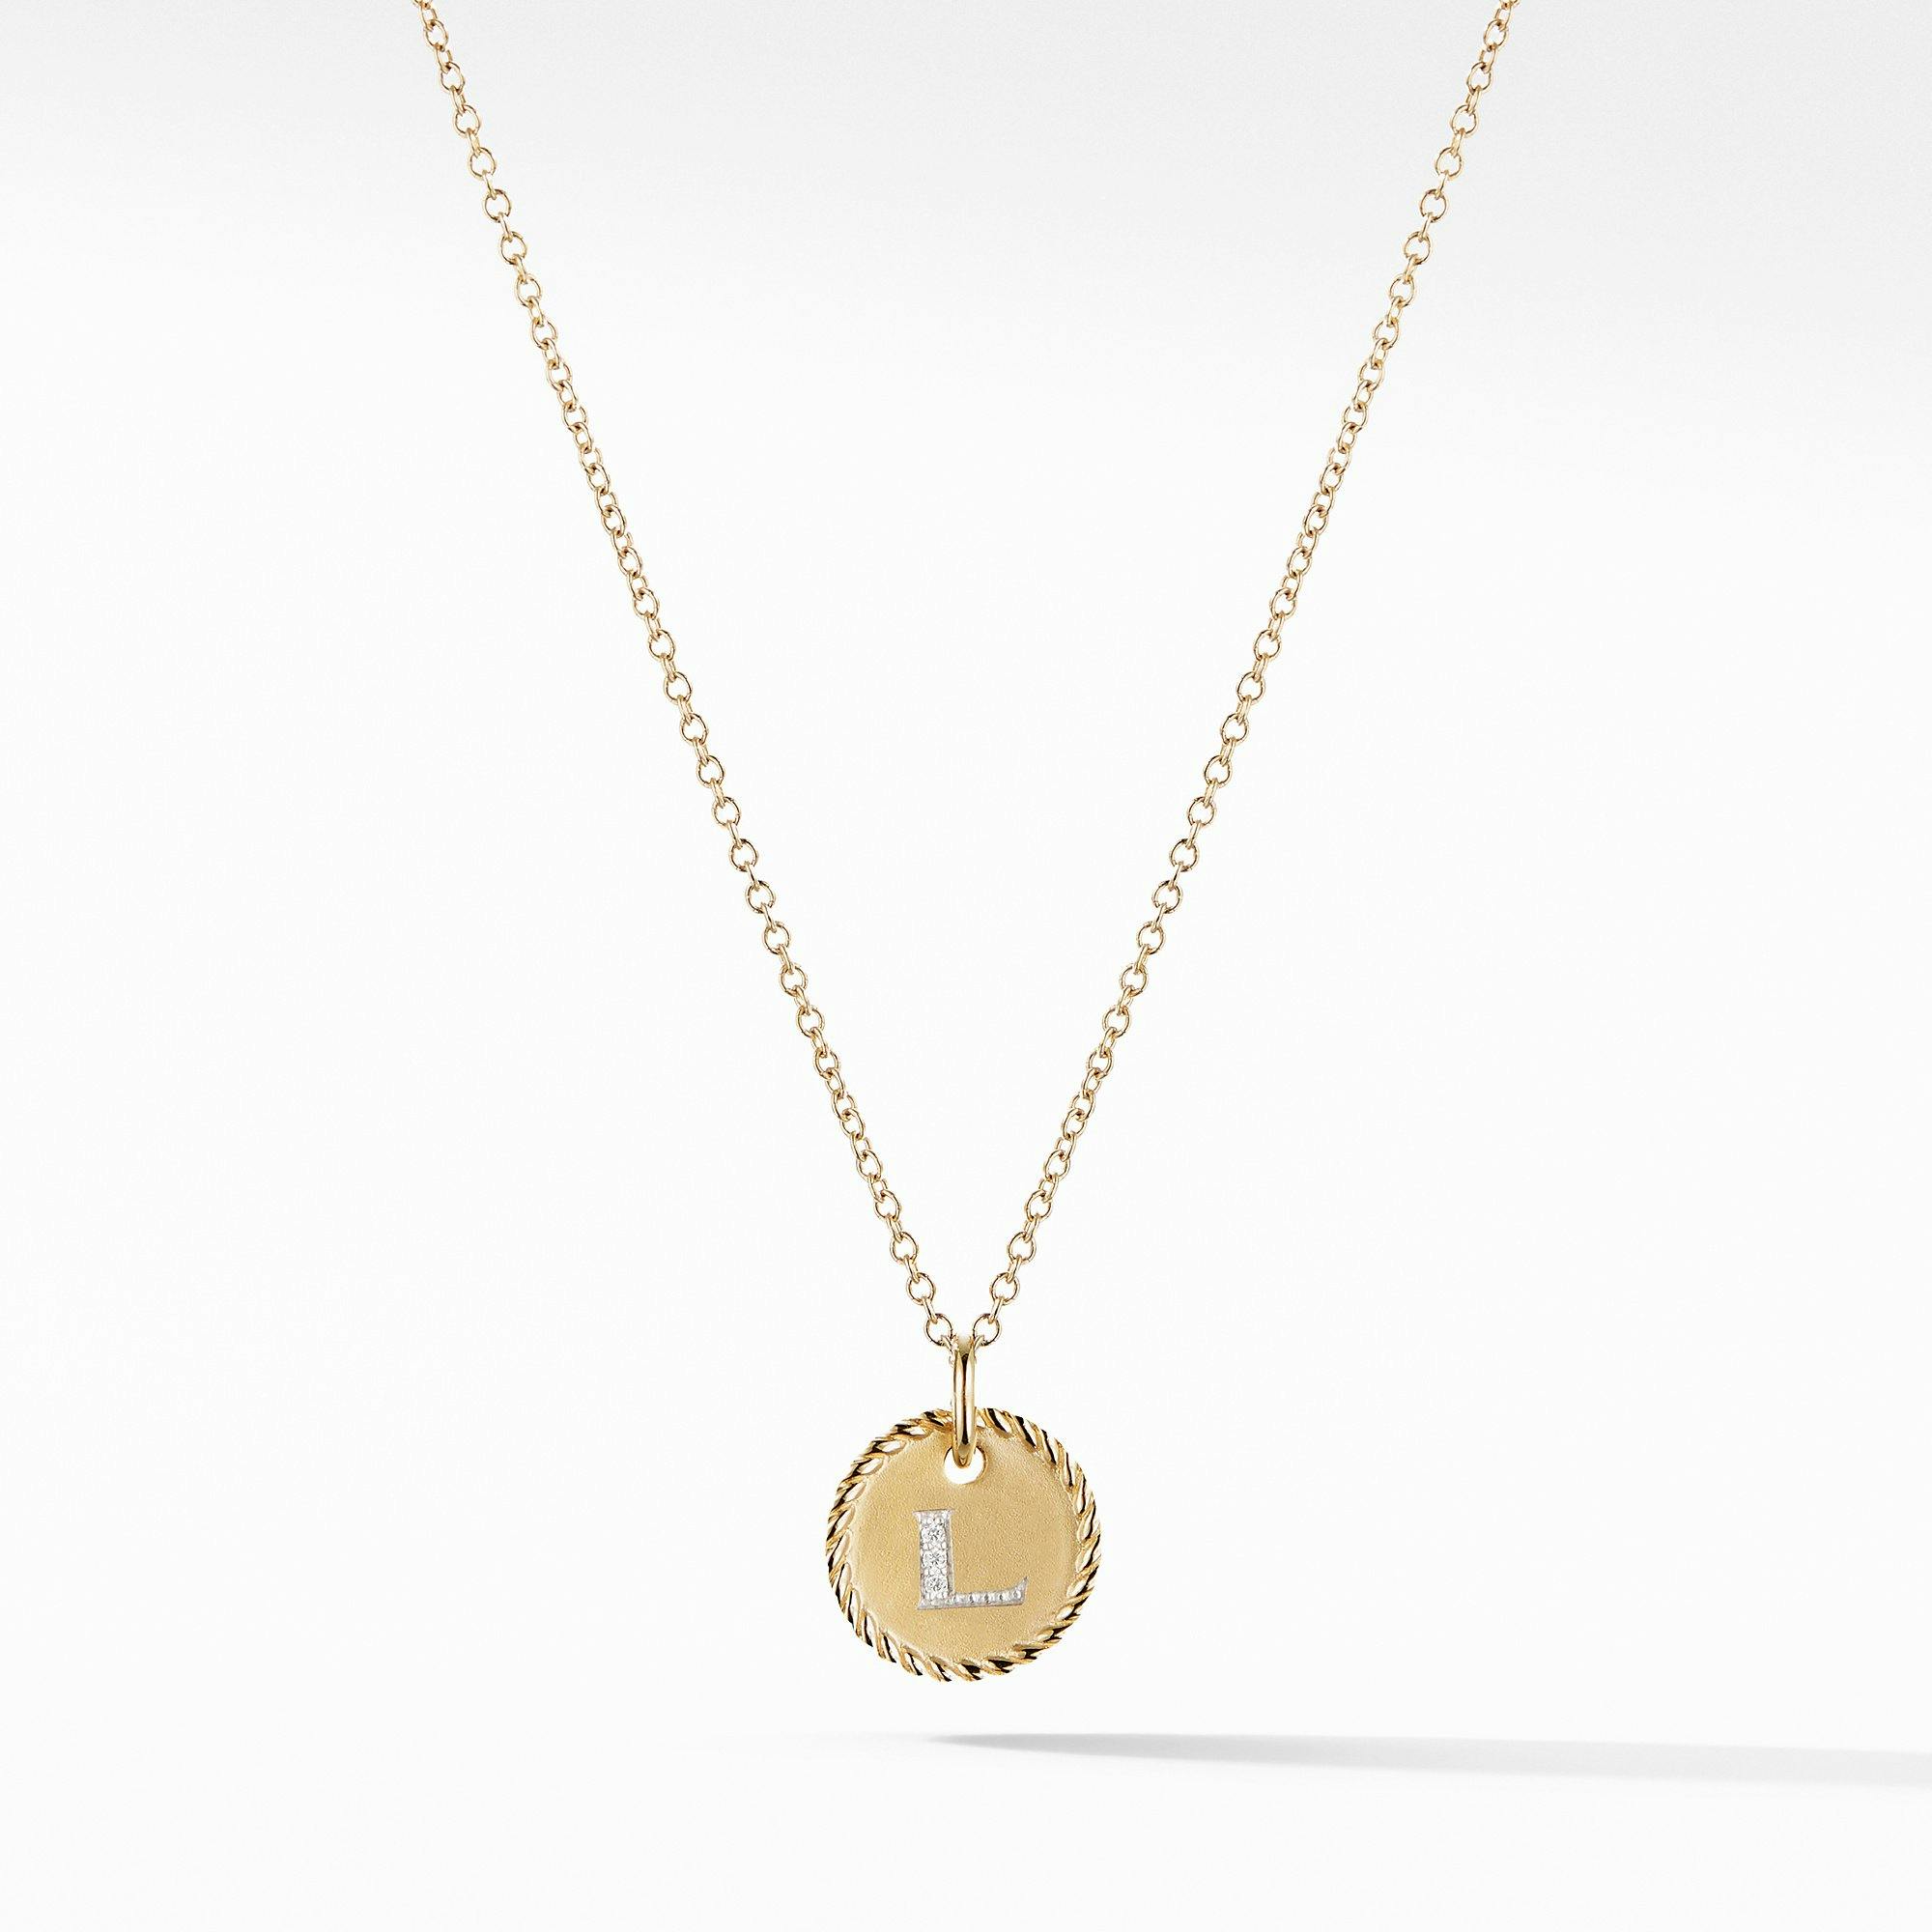 David Yurman "L" Initial Charm Necklace in 18k Yellow Gold with Diamonds